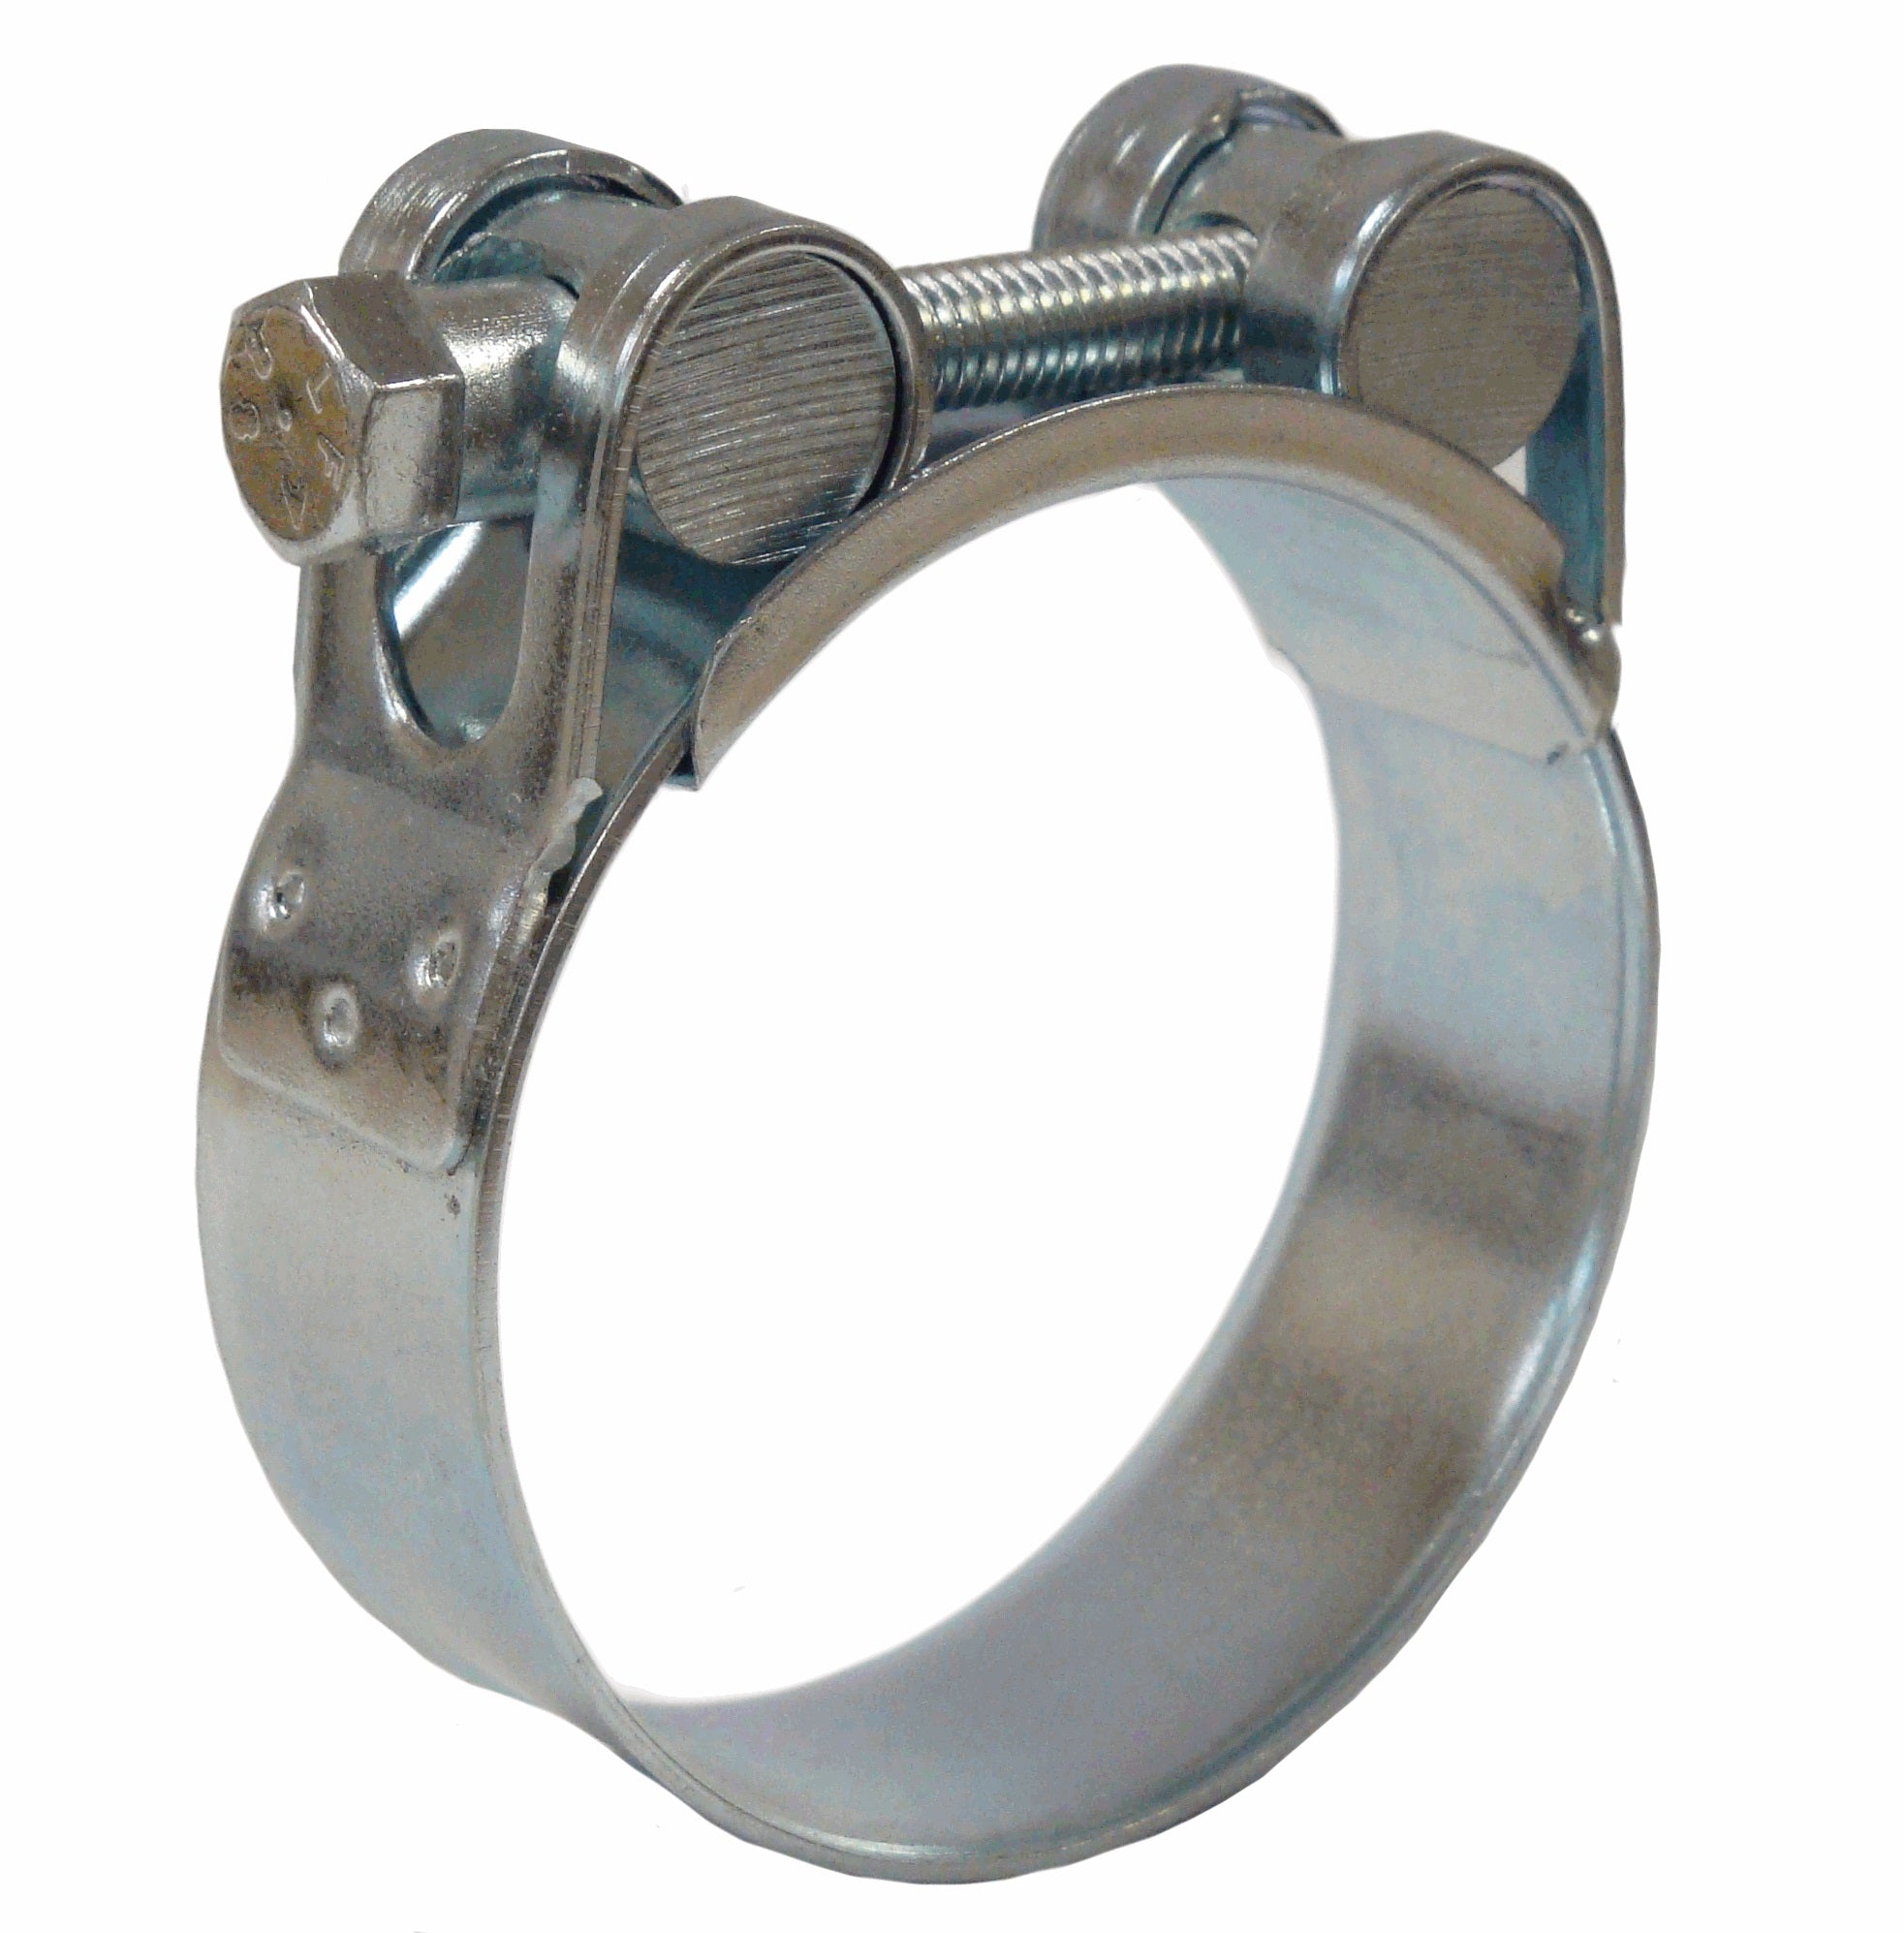 Jubilee® Superclamp 86-91mm 316 Stainless Steel